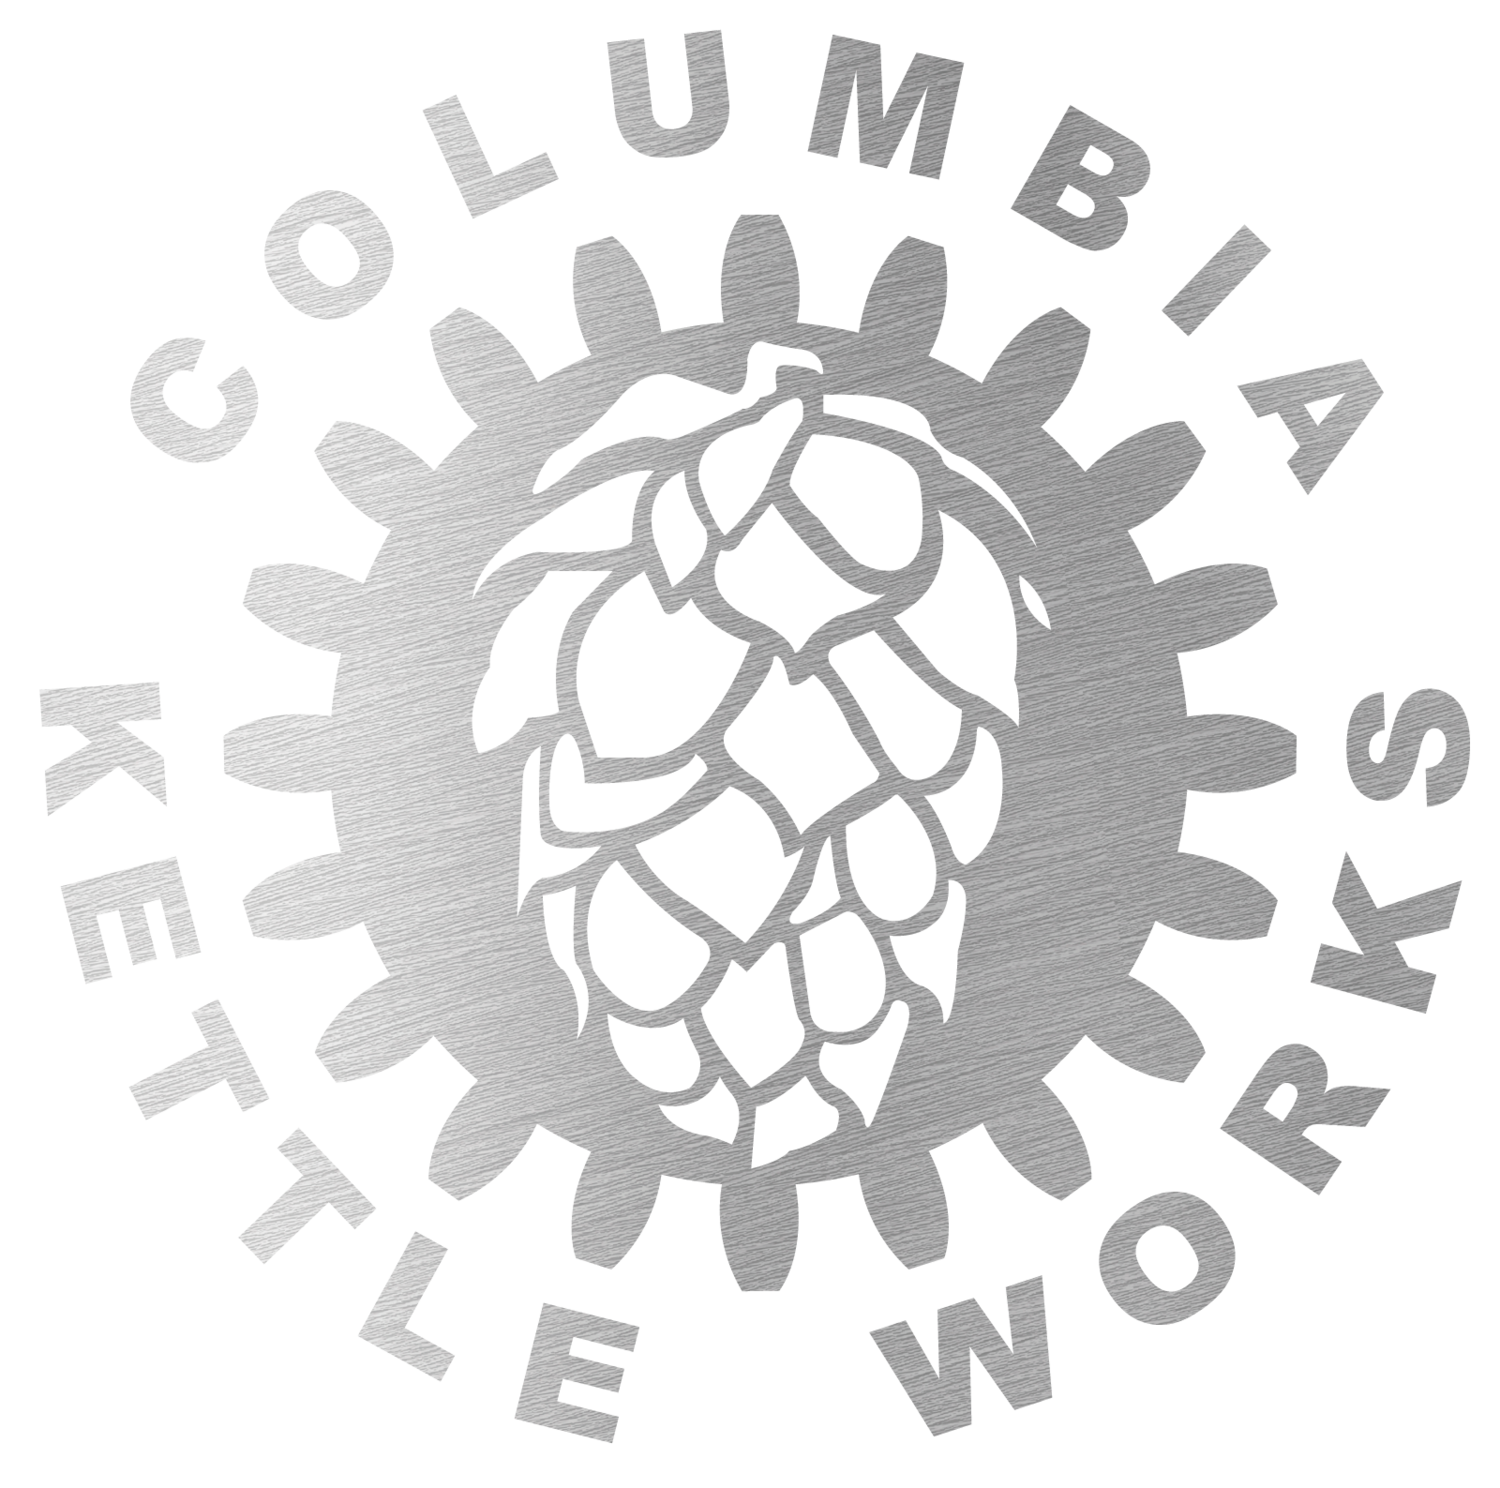 Columbia Kettle Works